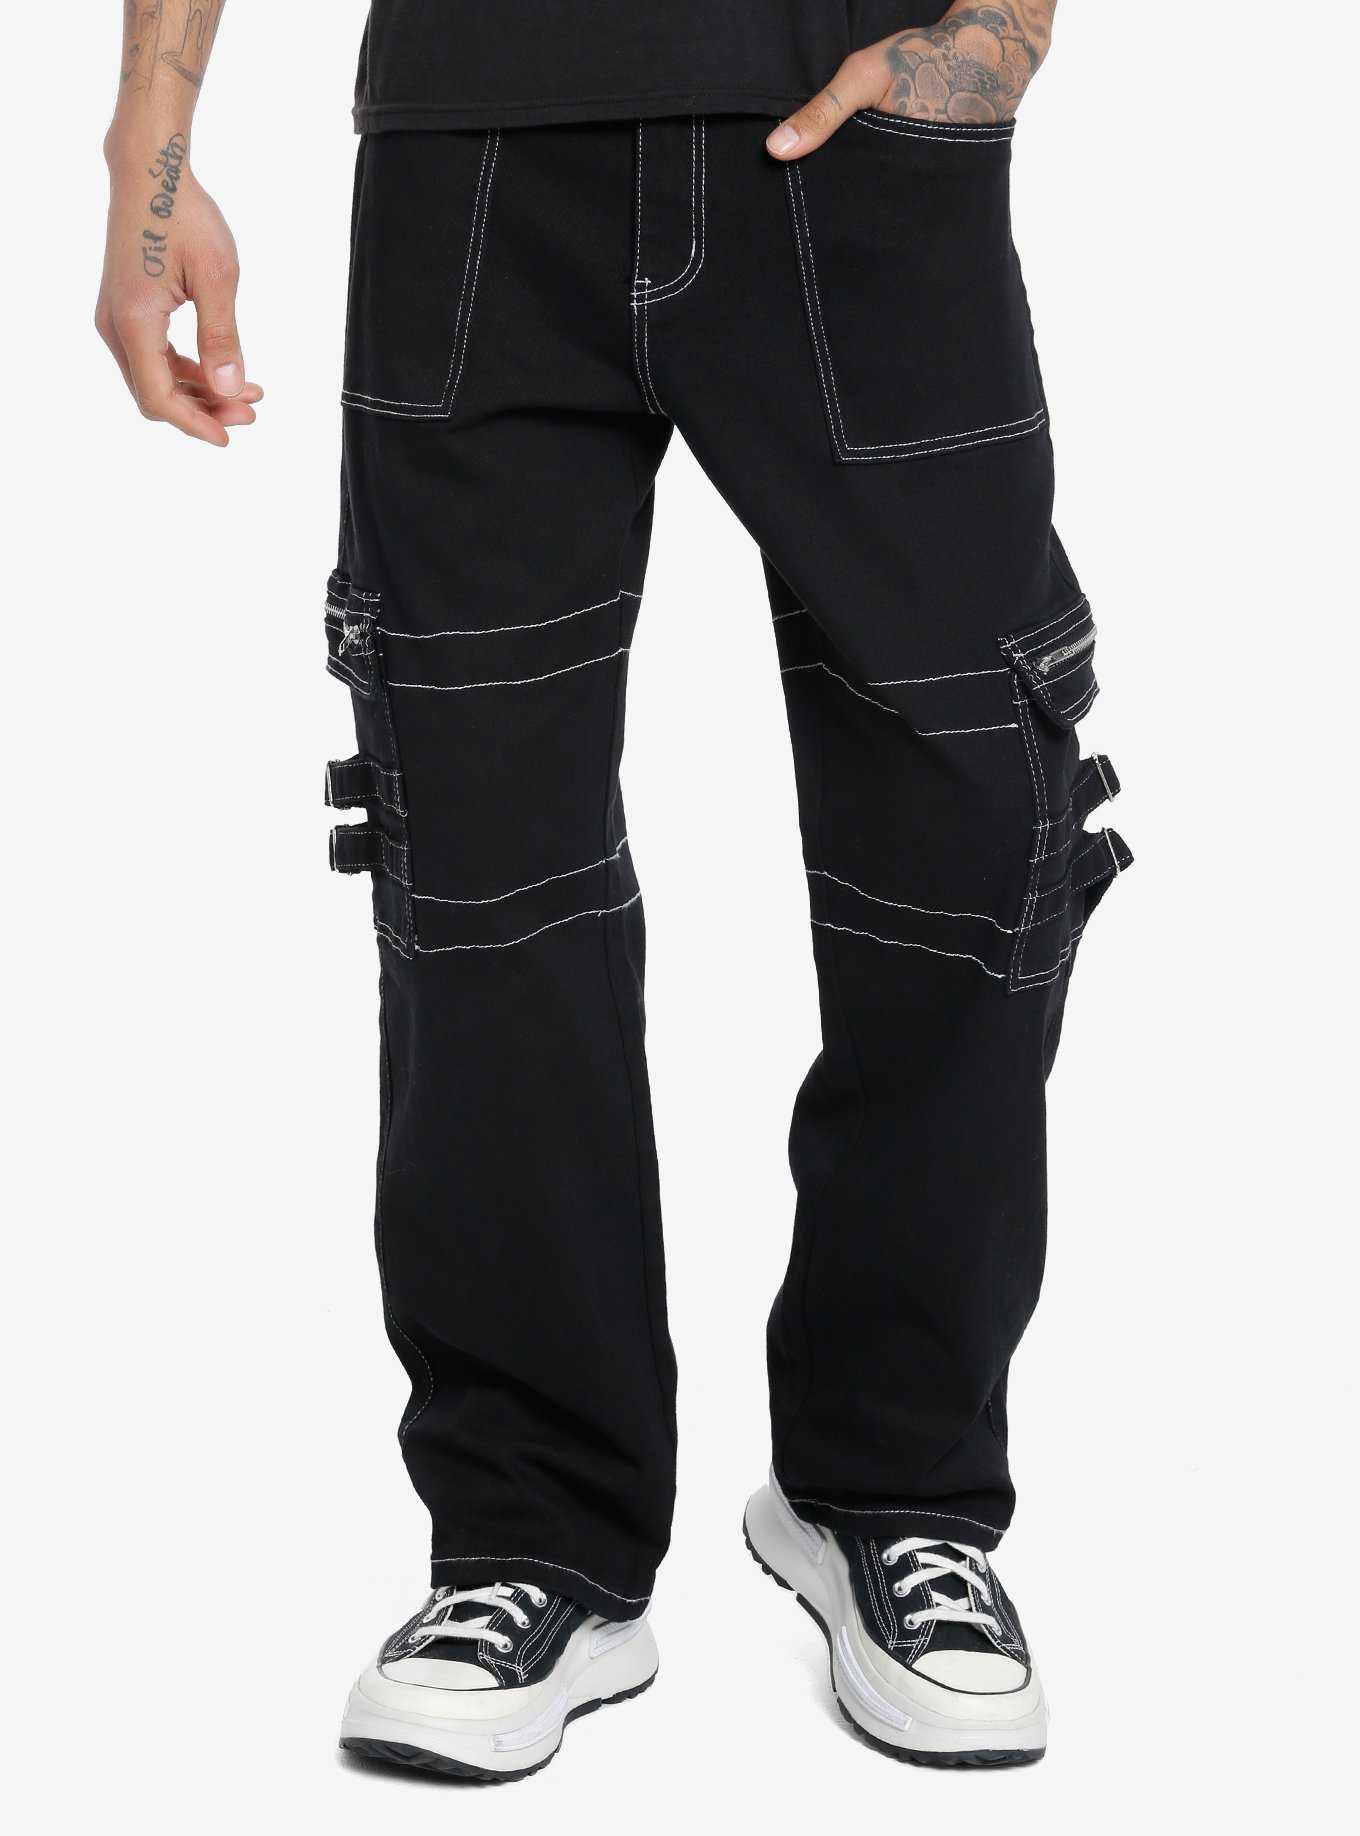 Hot Topic, Pants & Jumpsuits, Hot Topic Black White Gothic Split Pants  With Detachable Chain